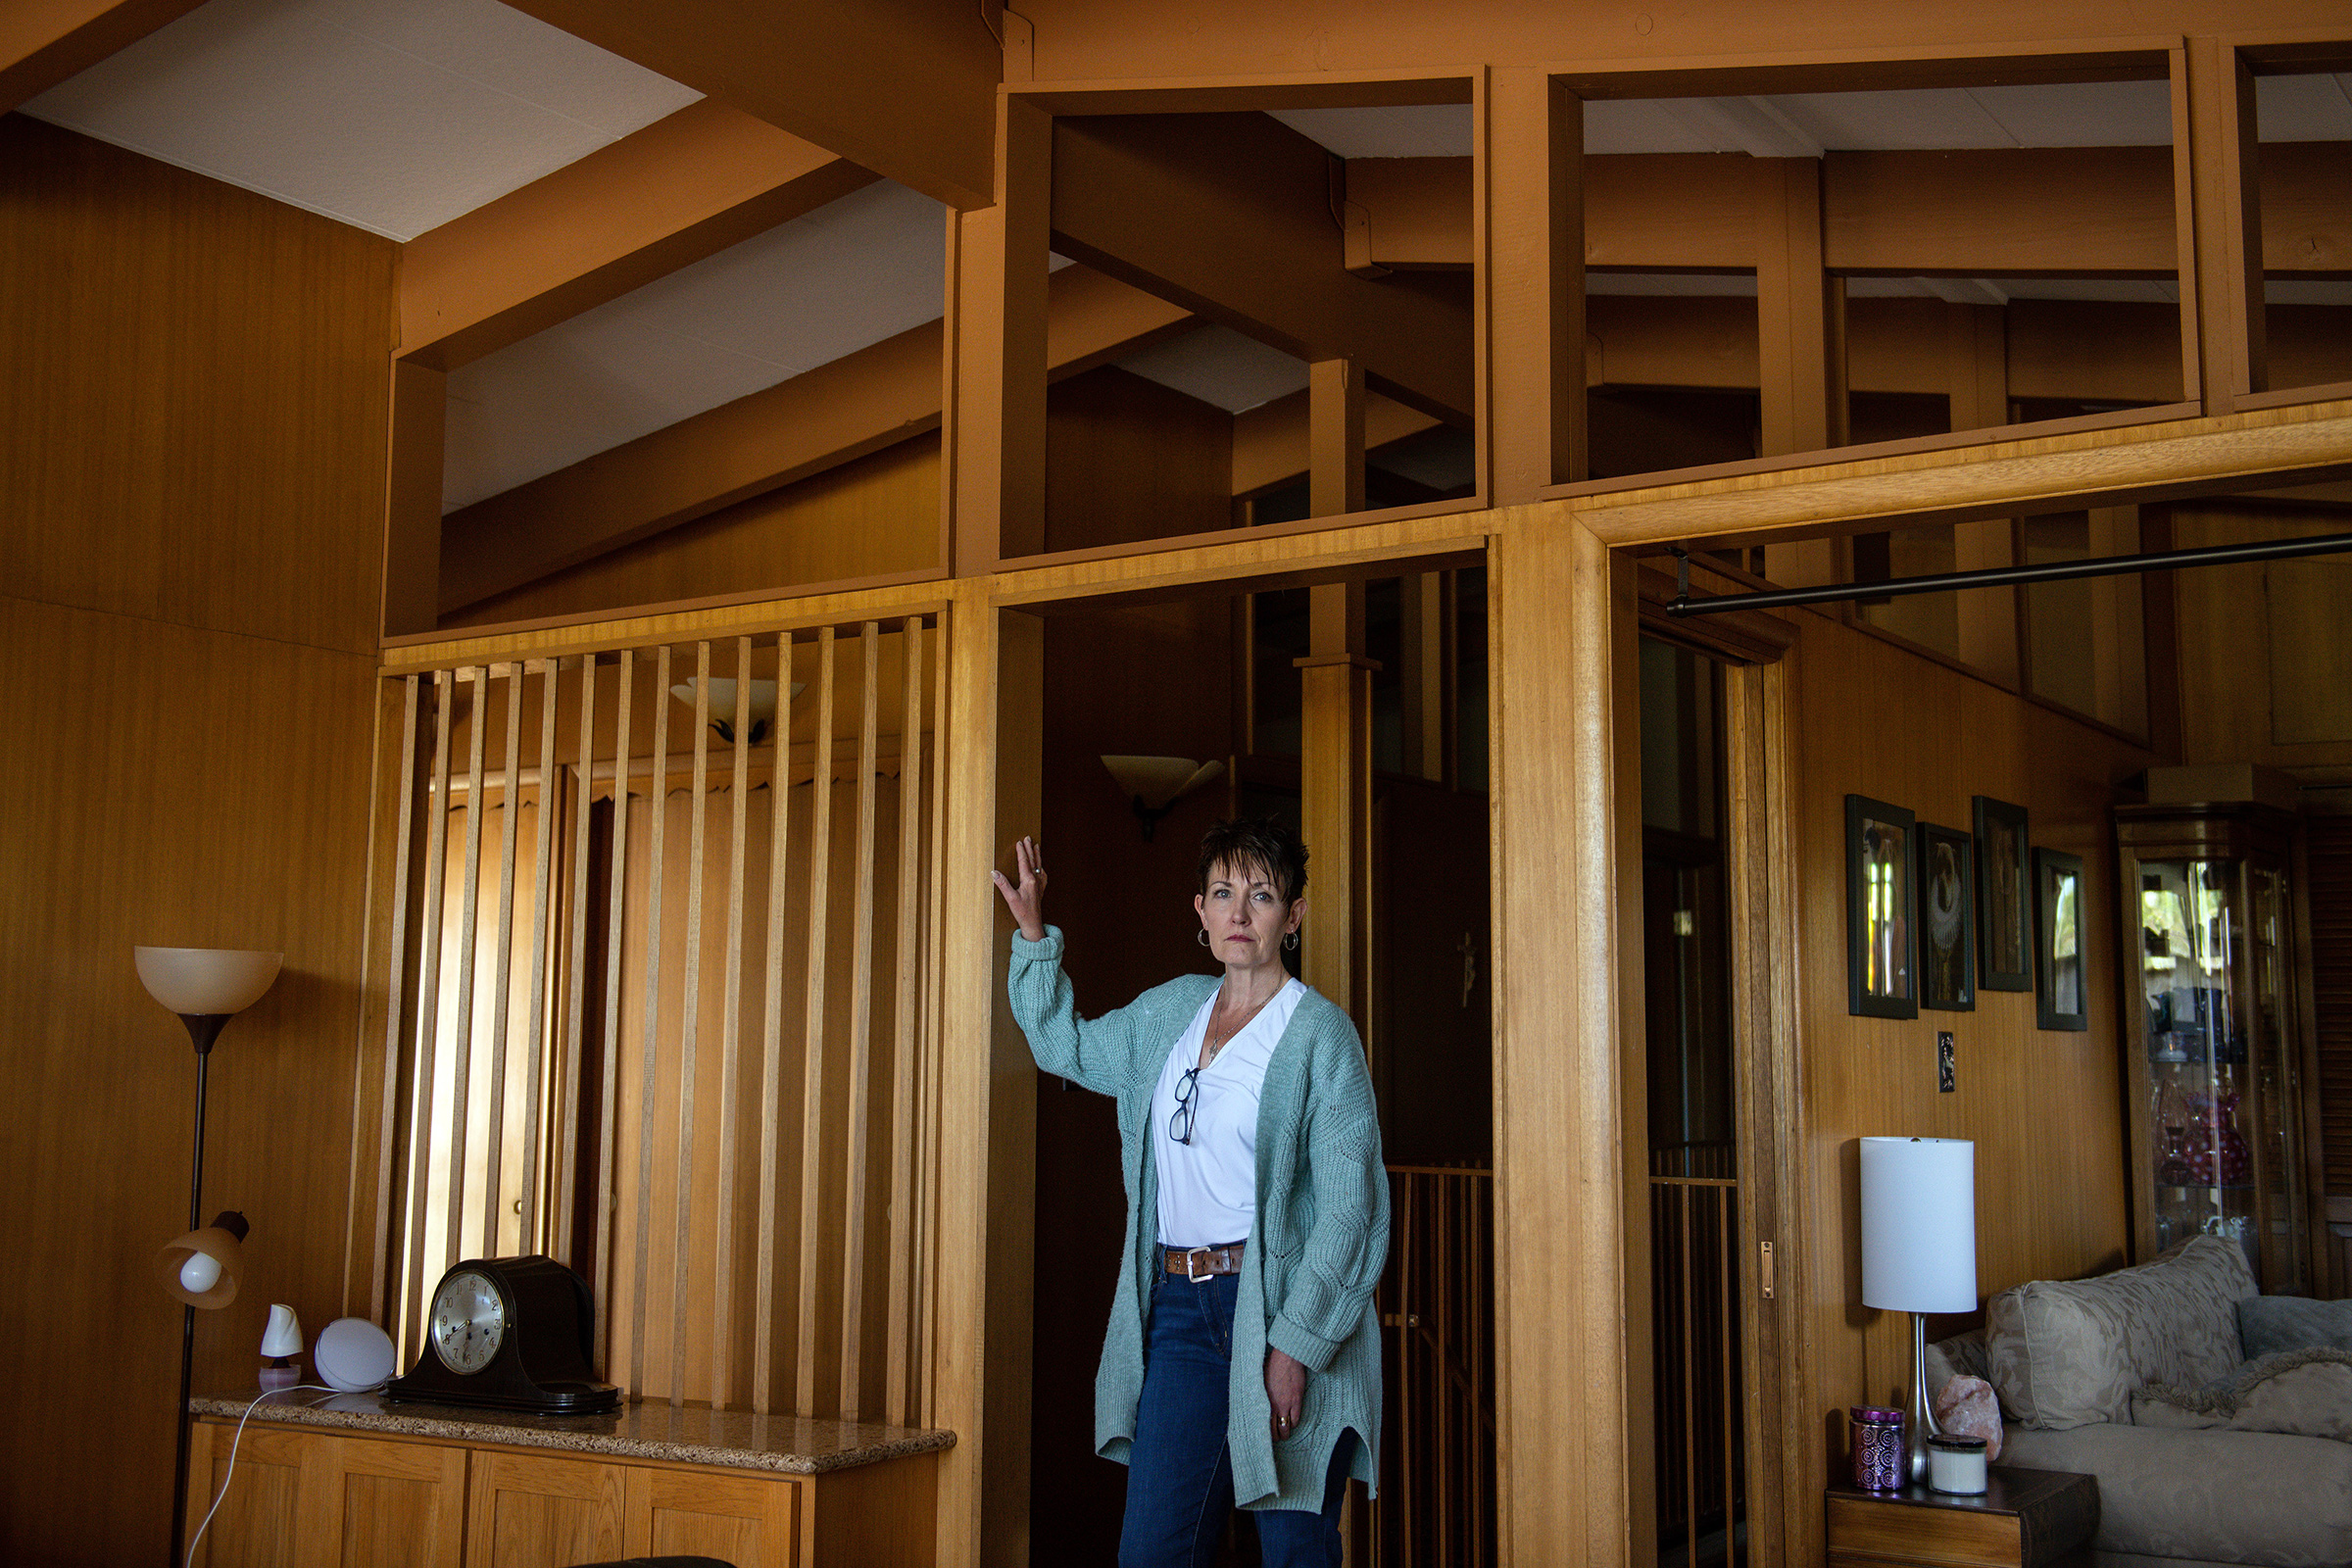 Laura Krausa, director of advocacy for CommonSpirit, a nonprofit hospital chain, at her home in Wheat Ridge, Colo., in May 2022. (Daniel Brenner—The New York Times/Redux)